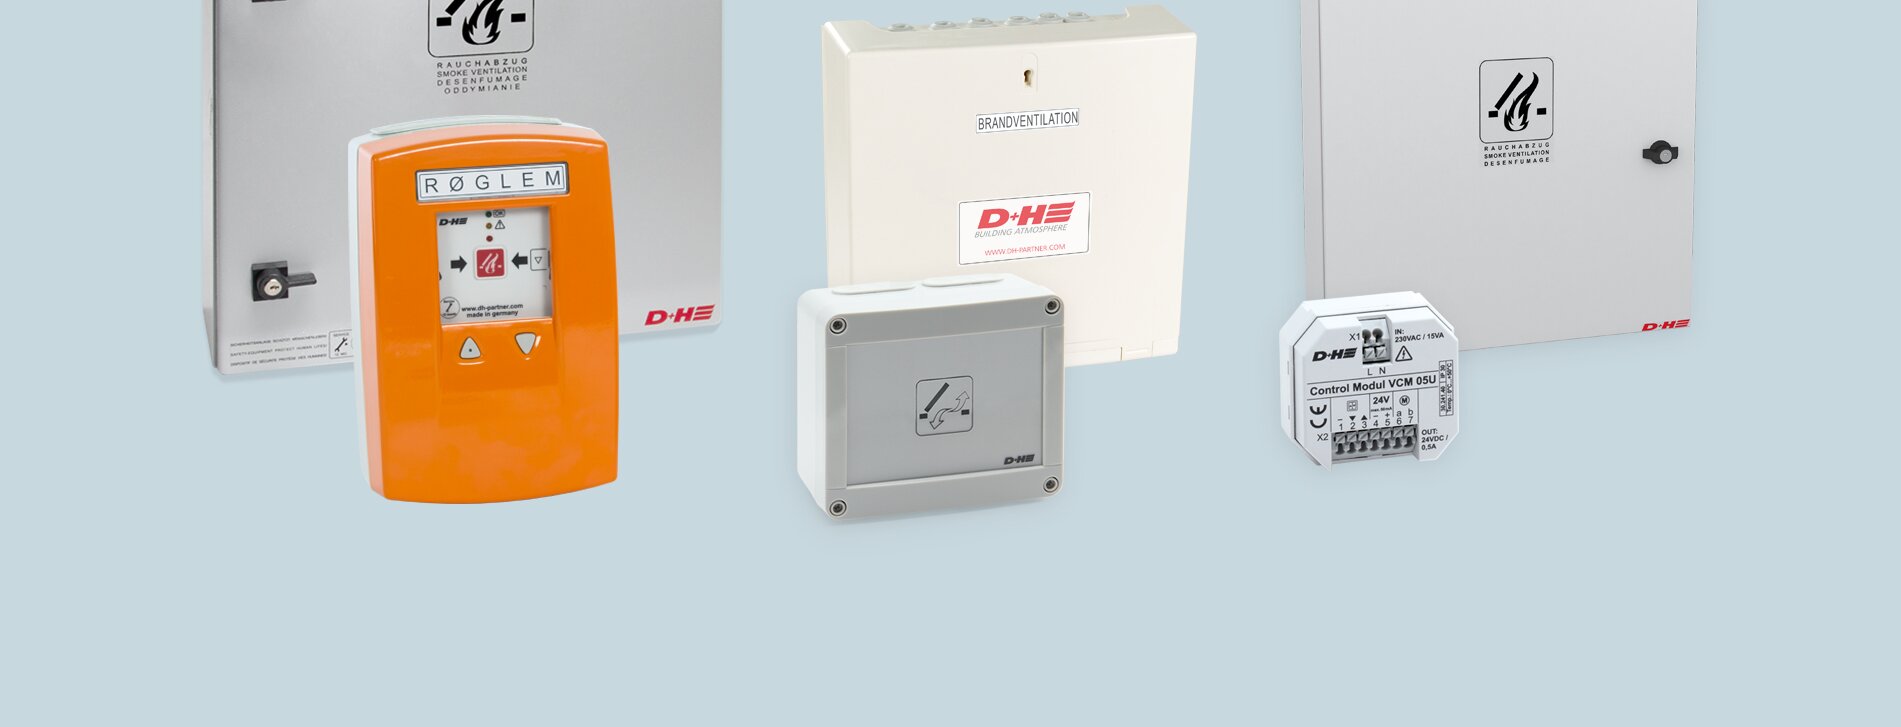 Overview of control unit groups in various colors and sizes